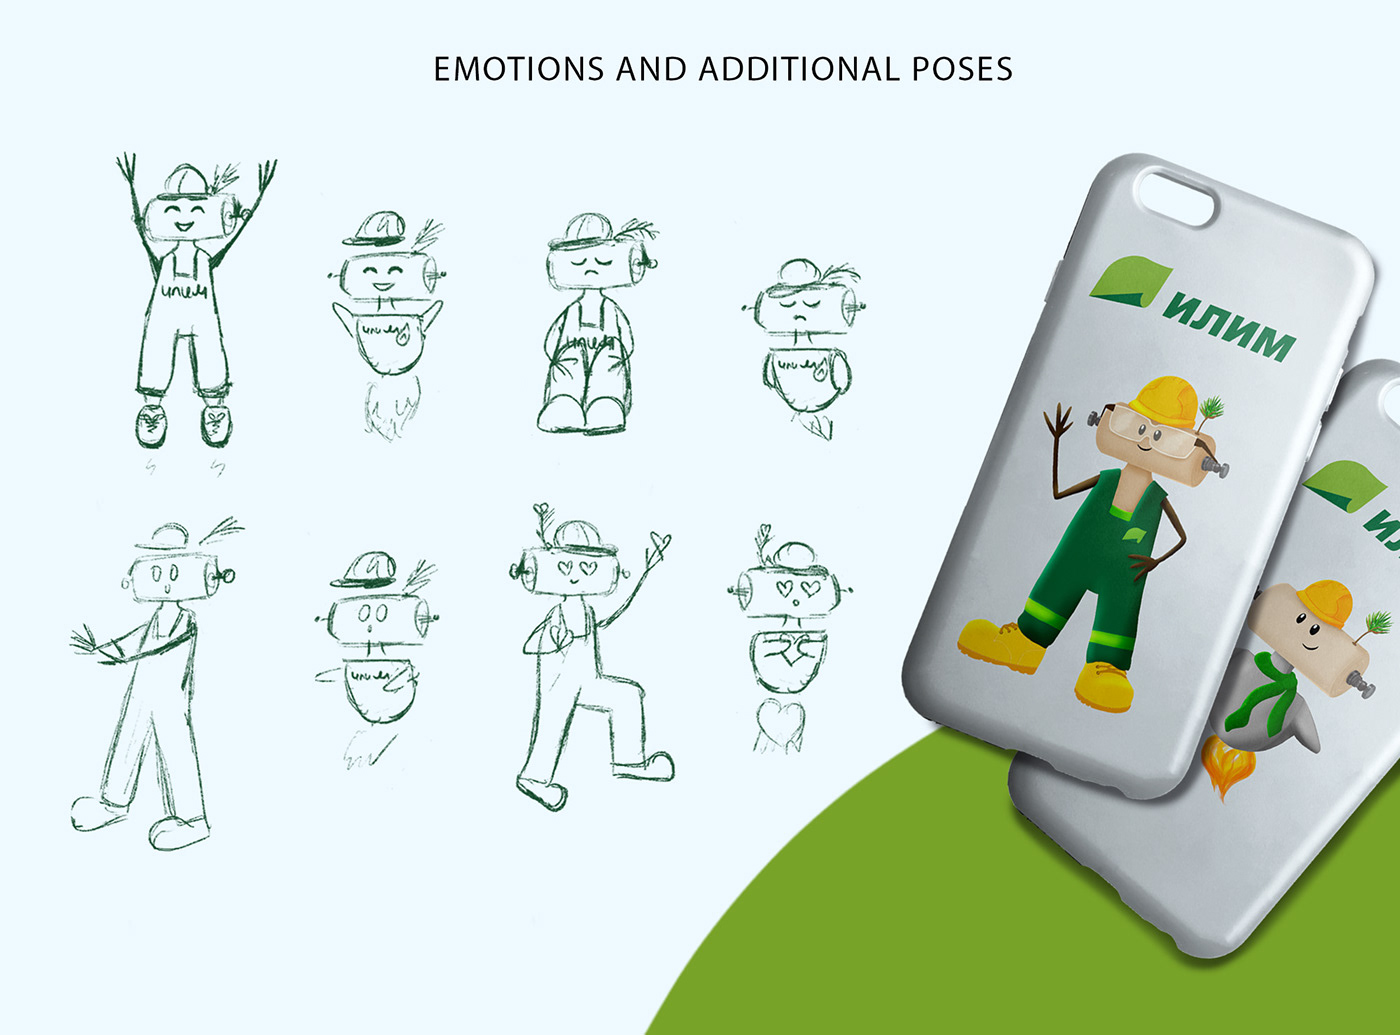 Emotions and poses